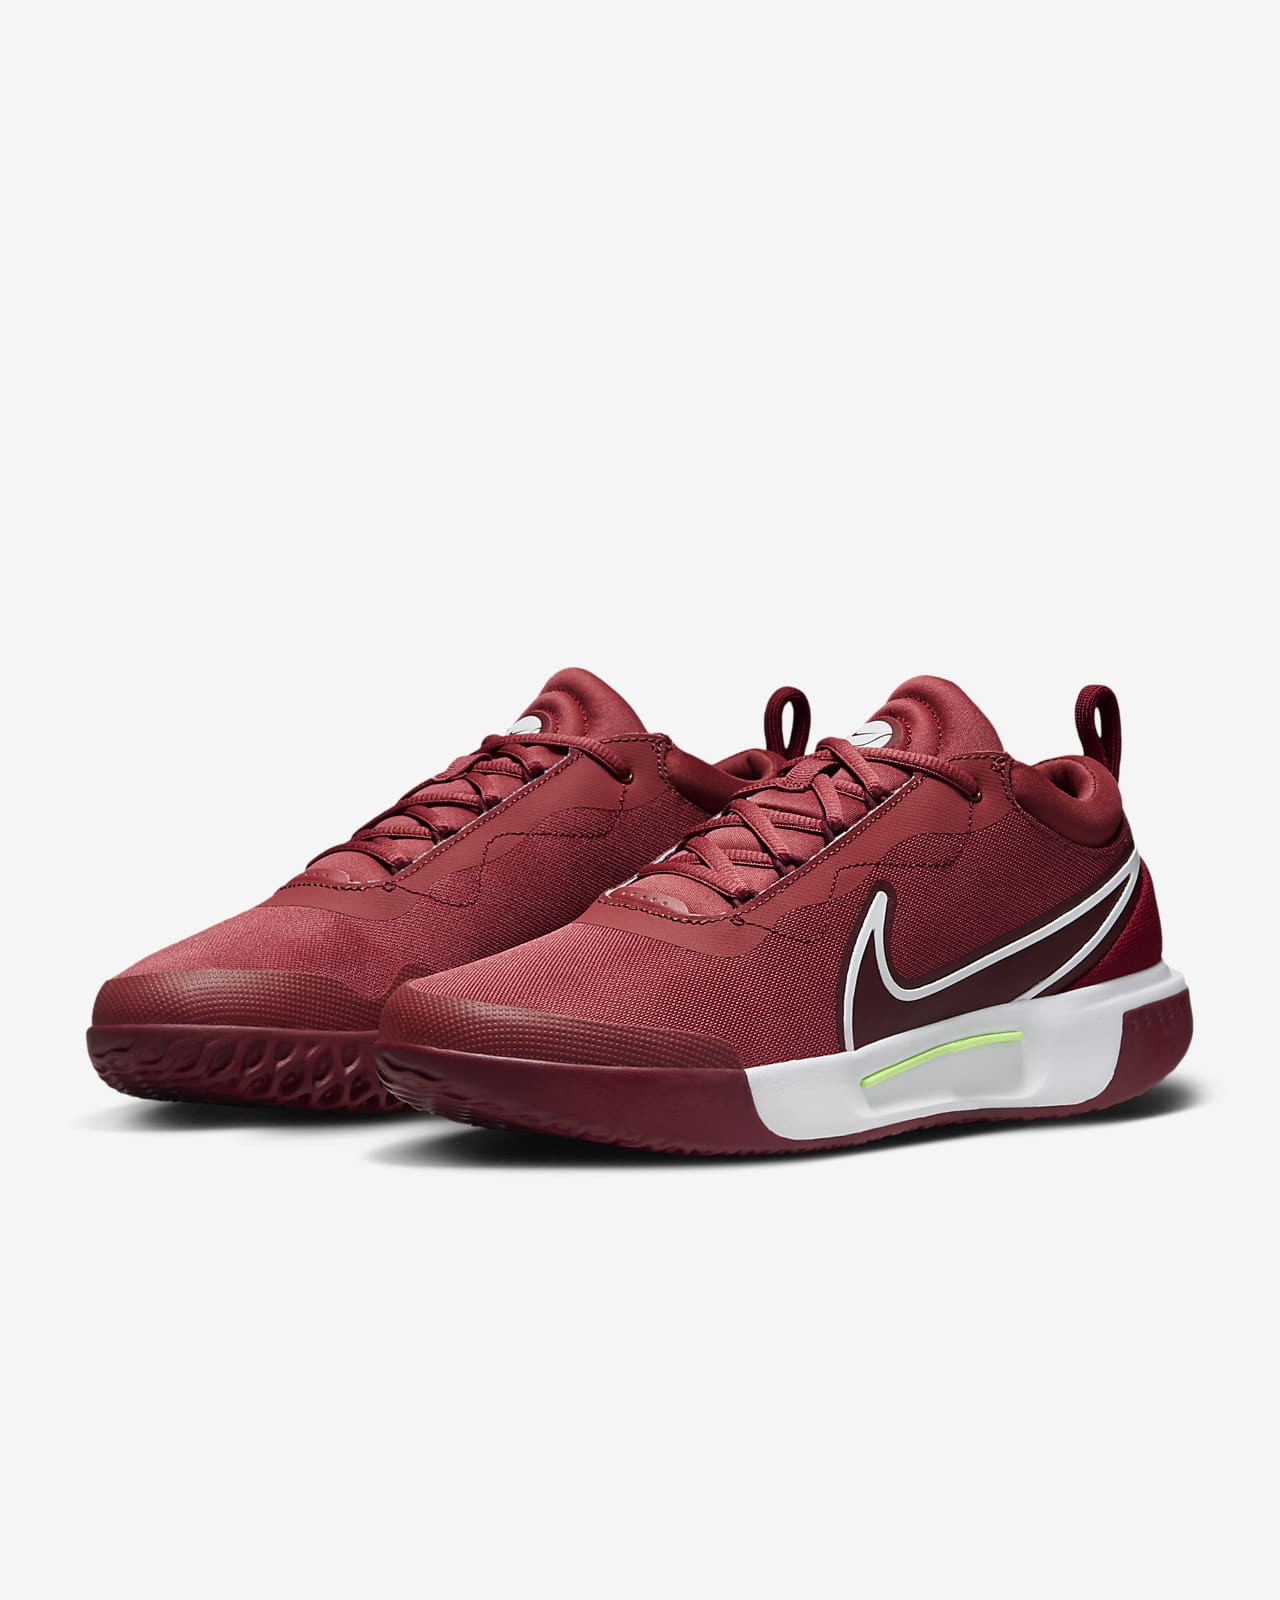 CHAUSSURES NIKE COURT ZOOM PRO ROME SURFACES DURES - NIKE - Homme -  Chaussures